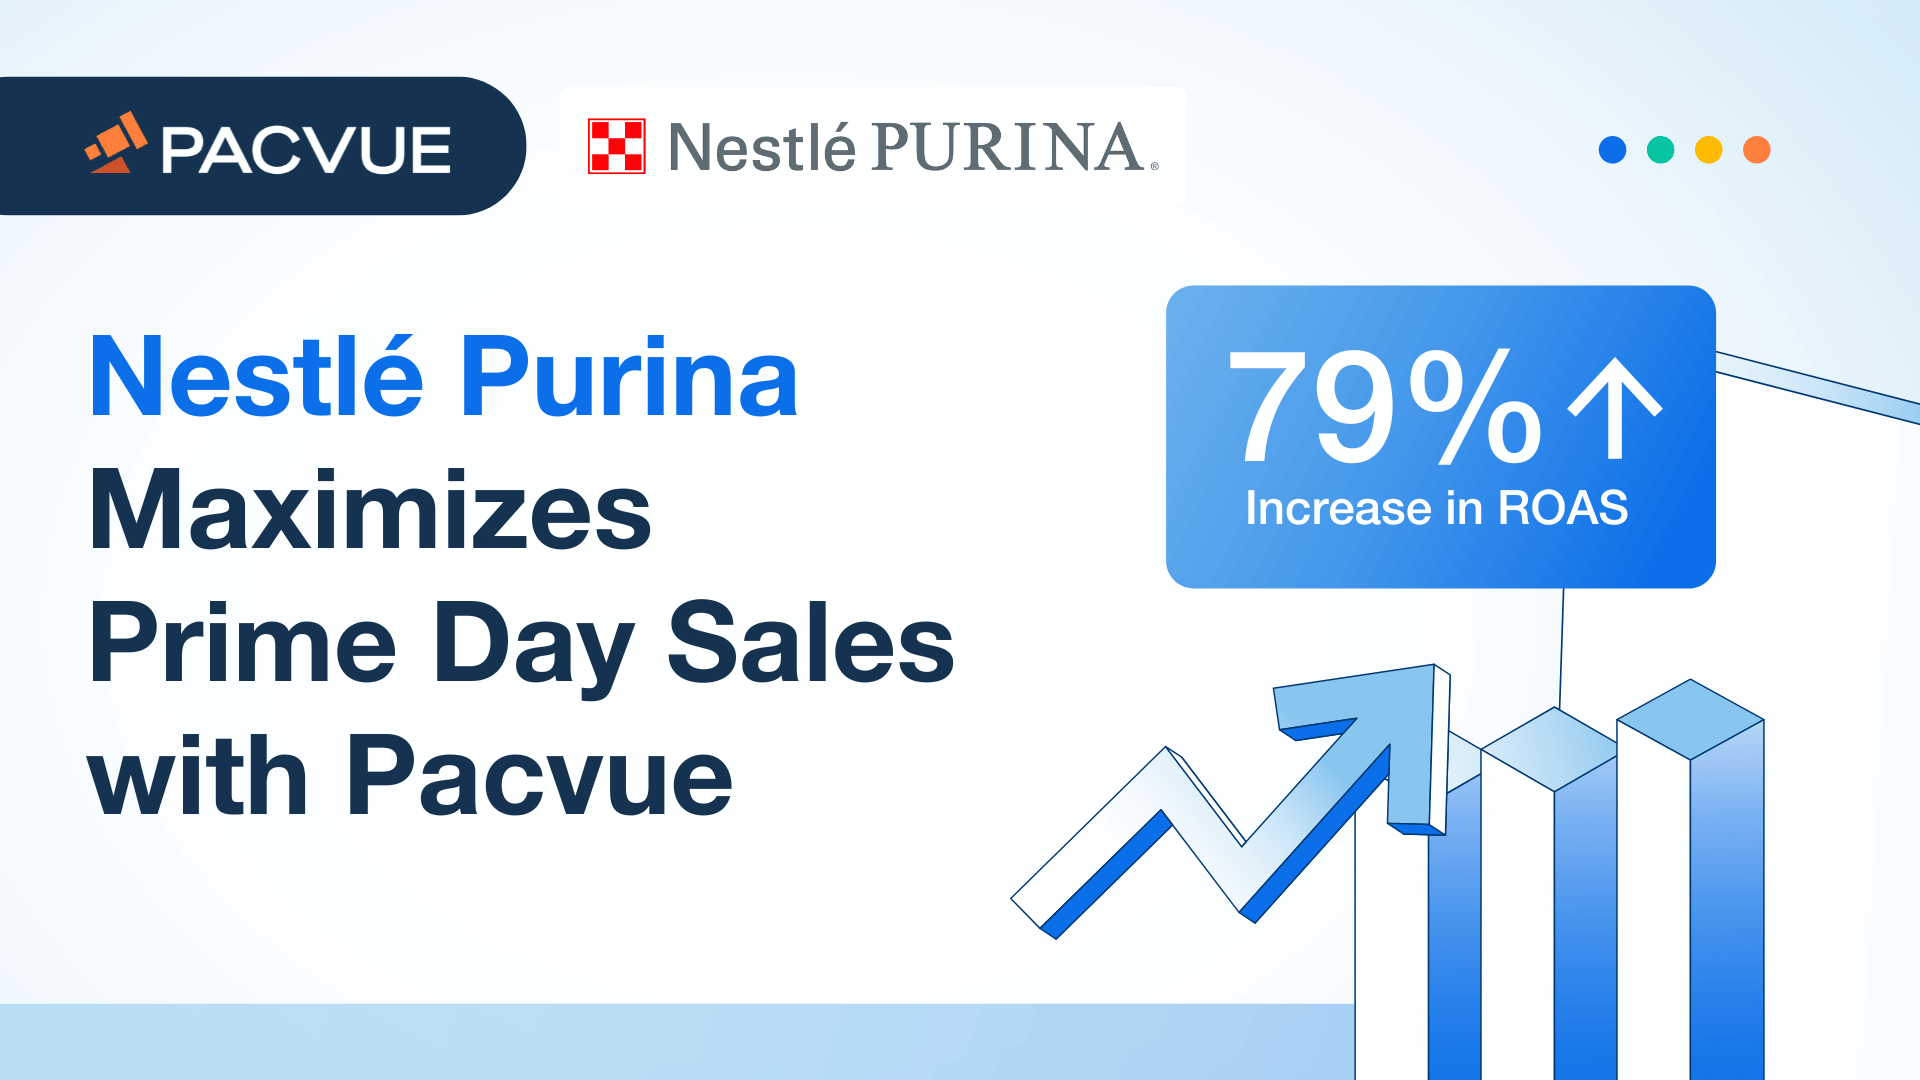 Nestlé Purina Maximizes Prime Day Sales with Pacvue